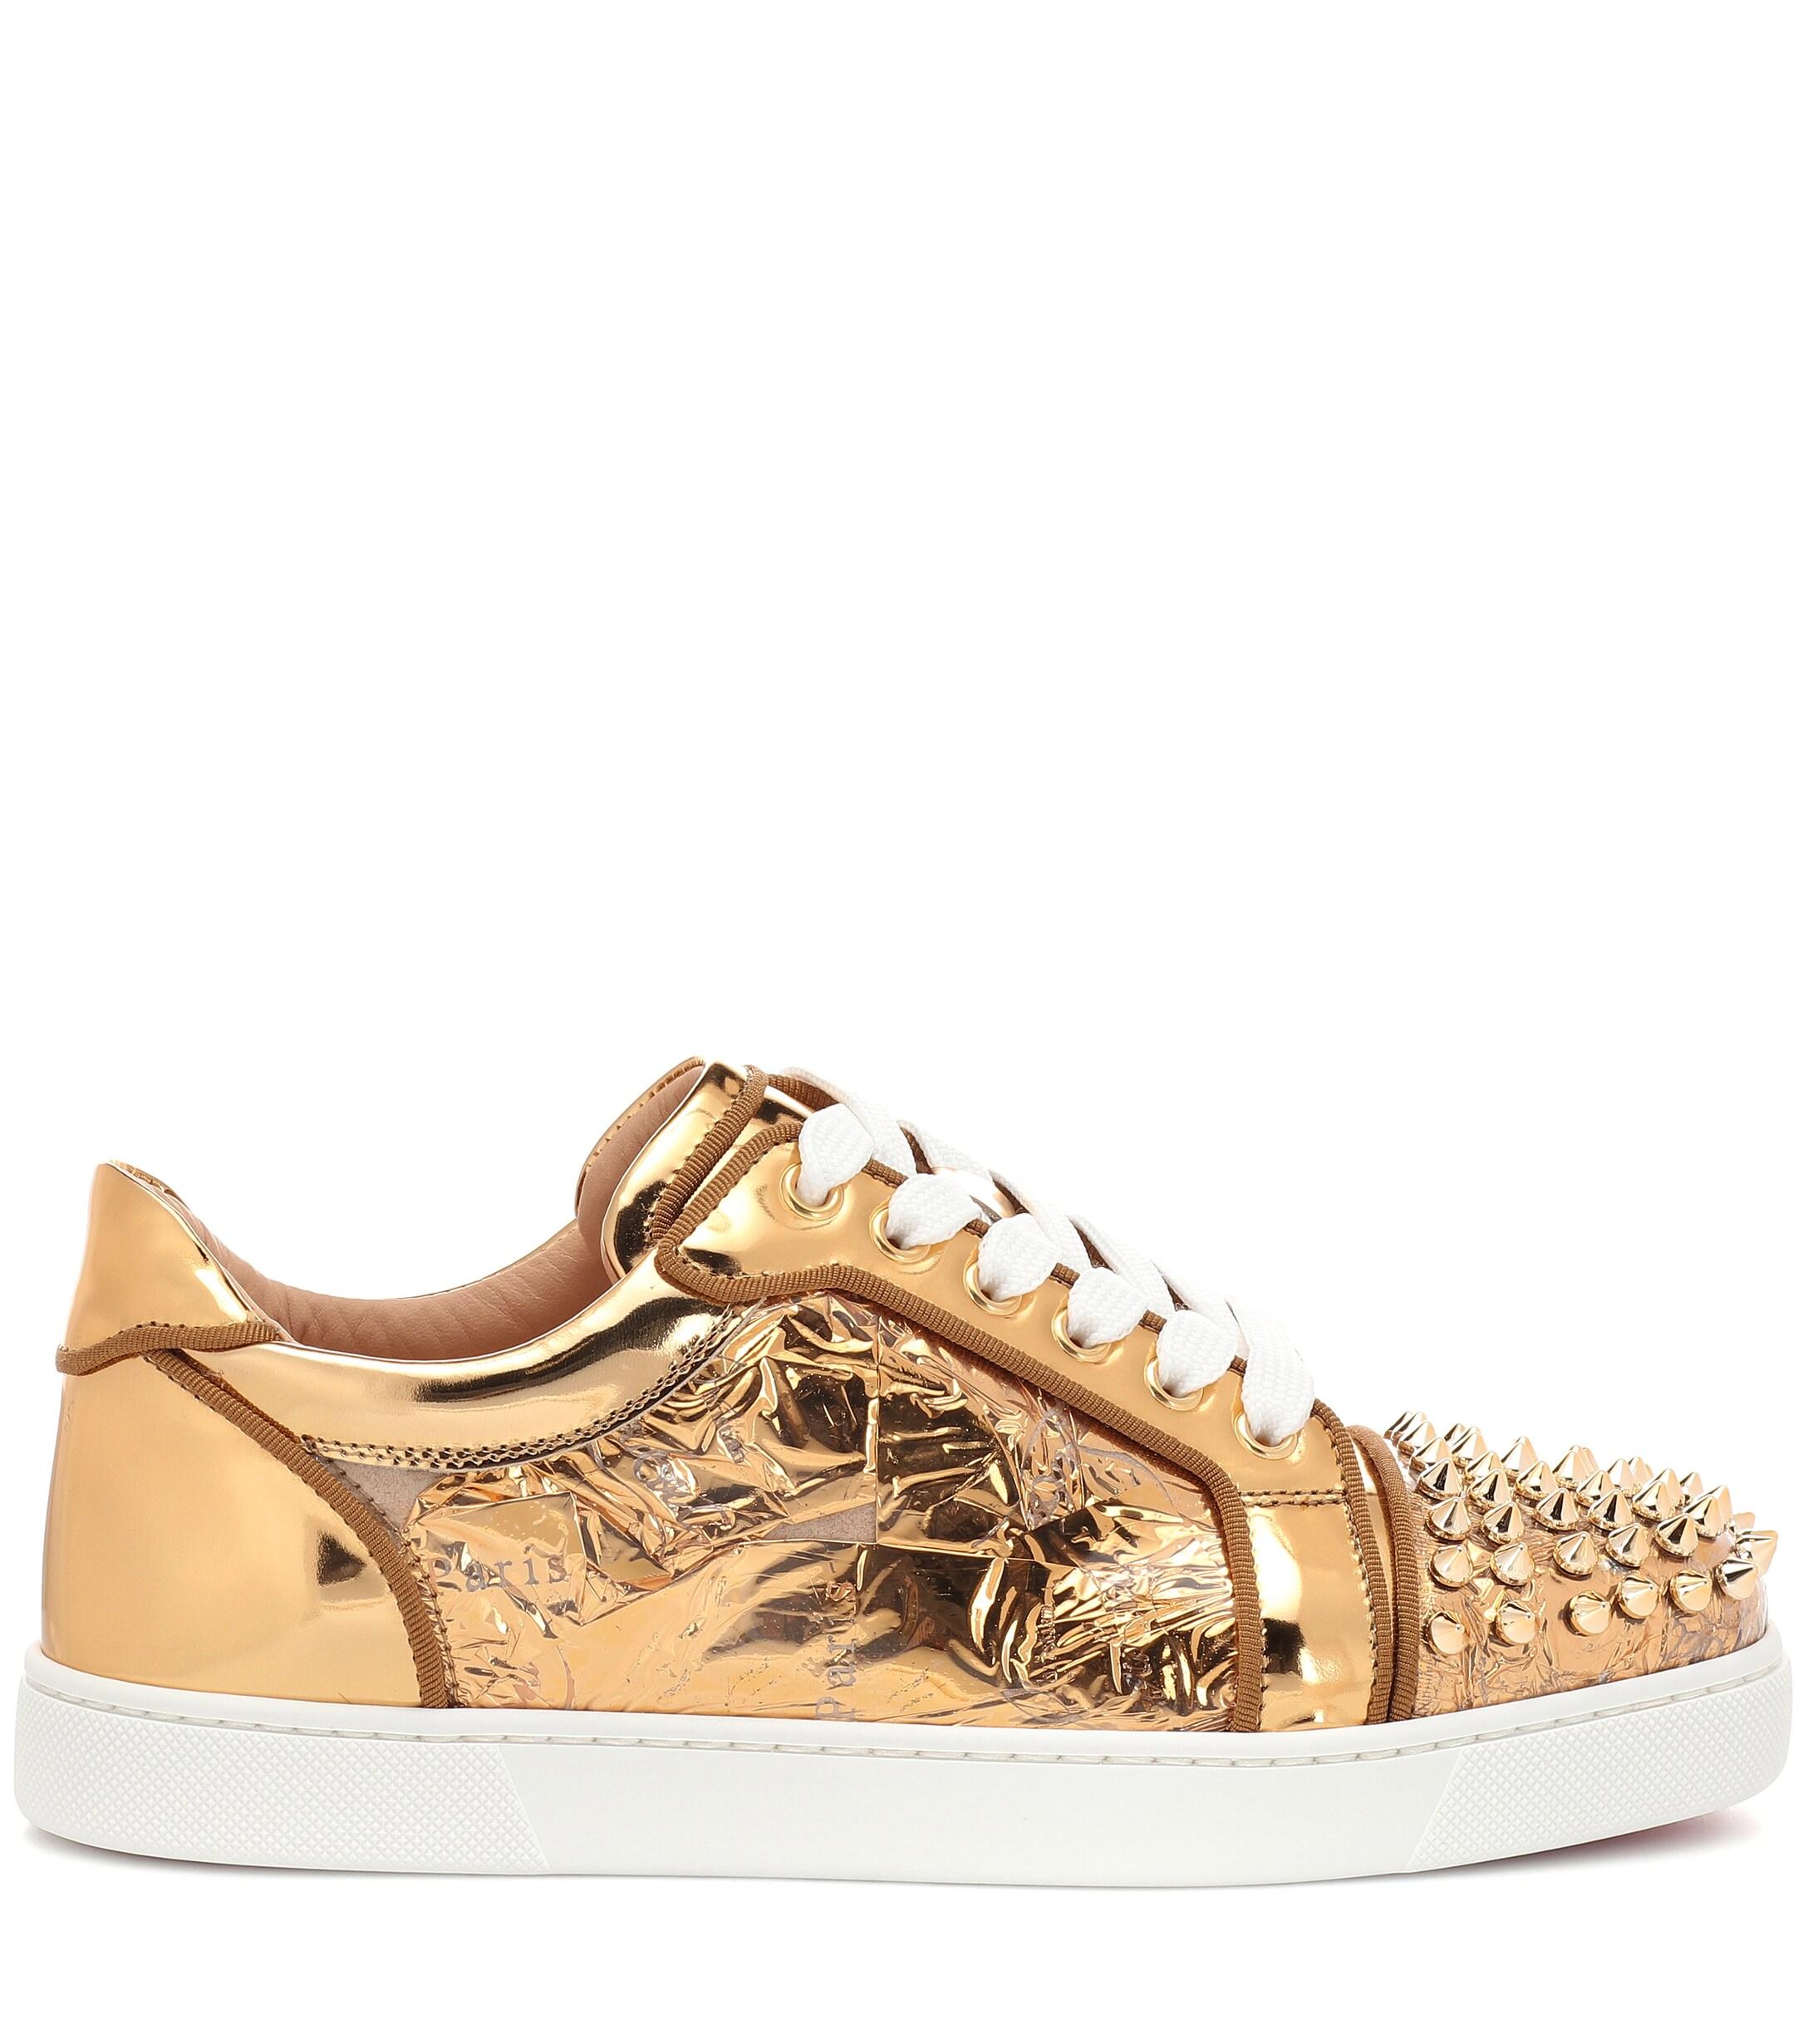 Christian Louboutin Vieira Spikes Embellished Leather Sneakers in 